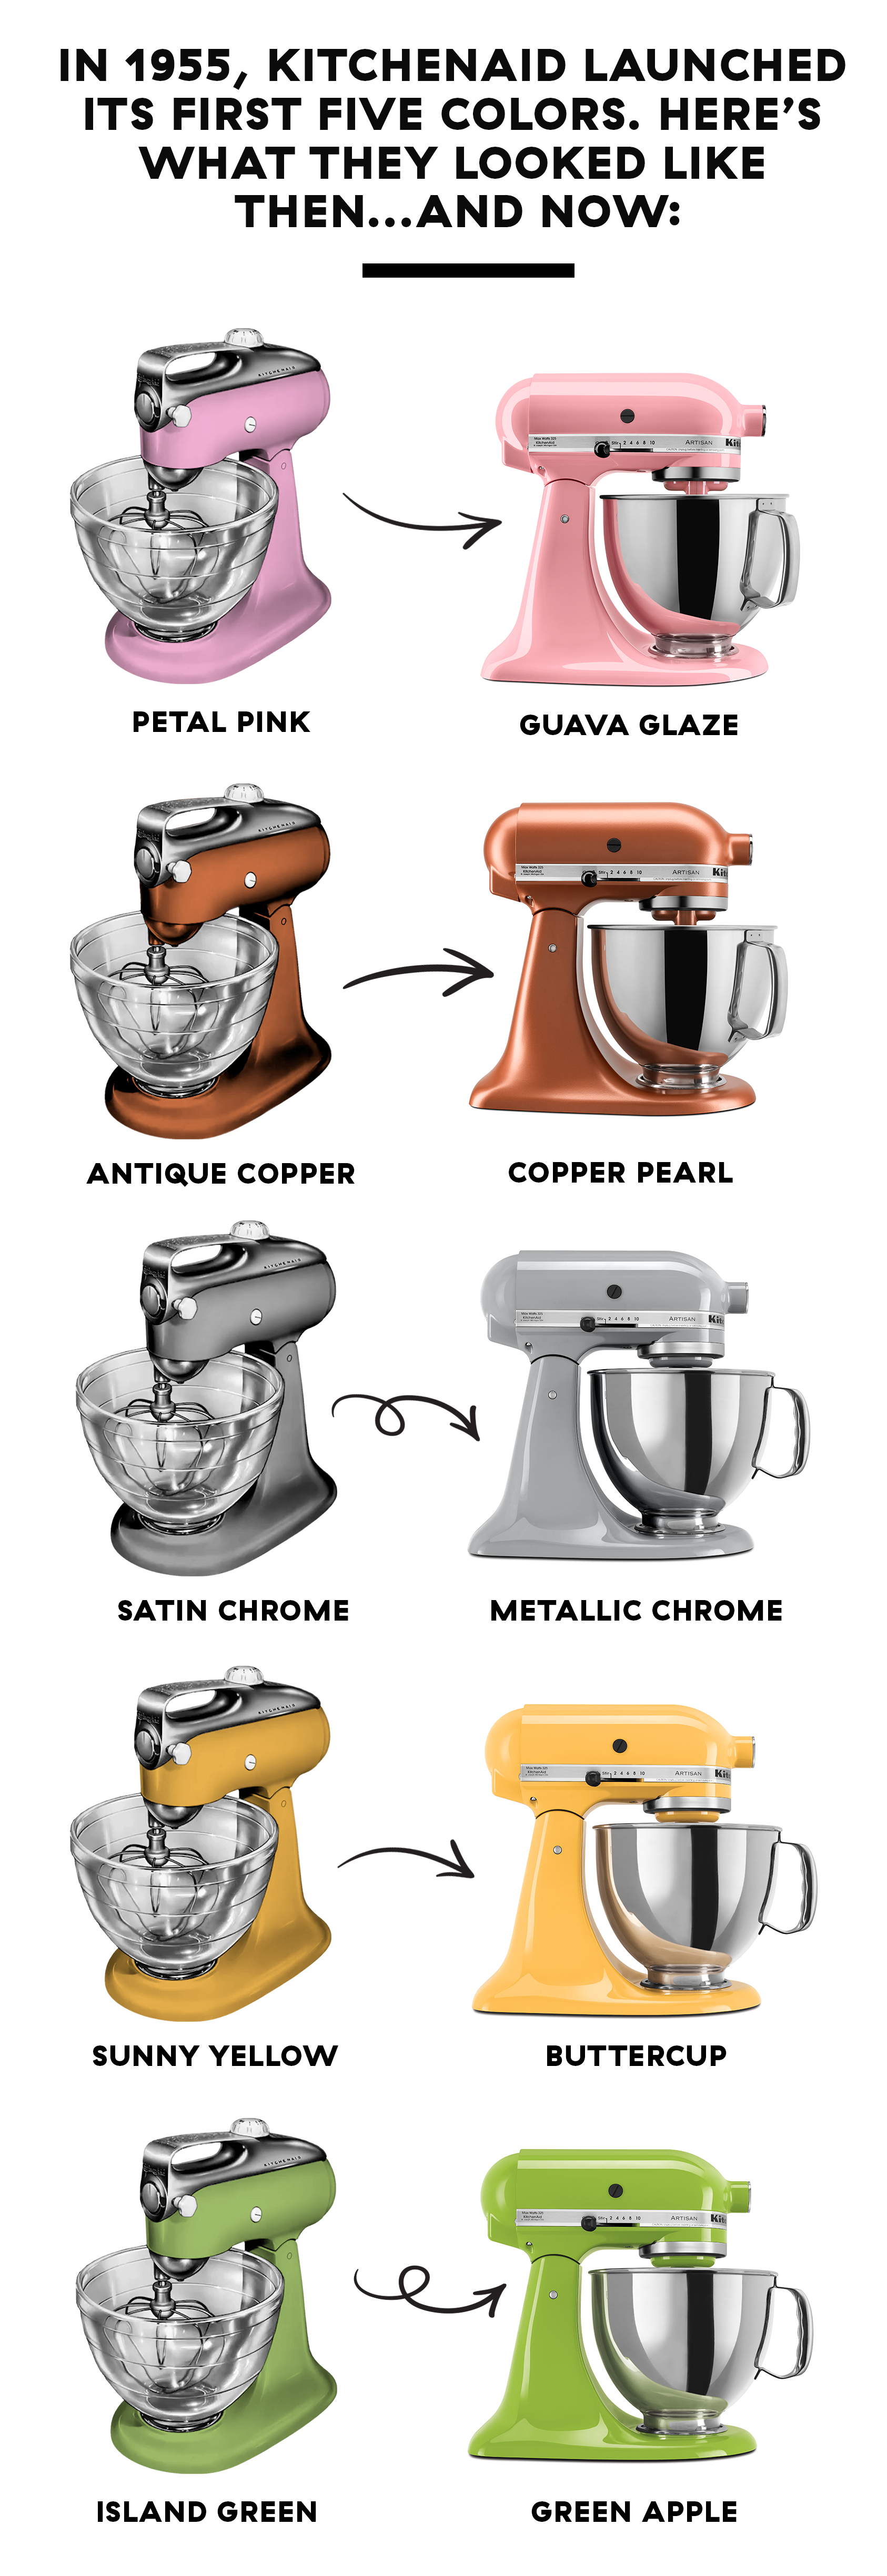 The KitchenAid stand mixer: How color, cake and nostalgia made an